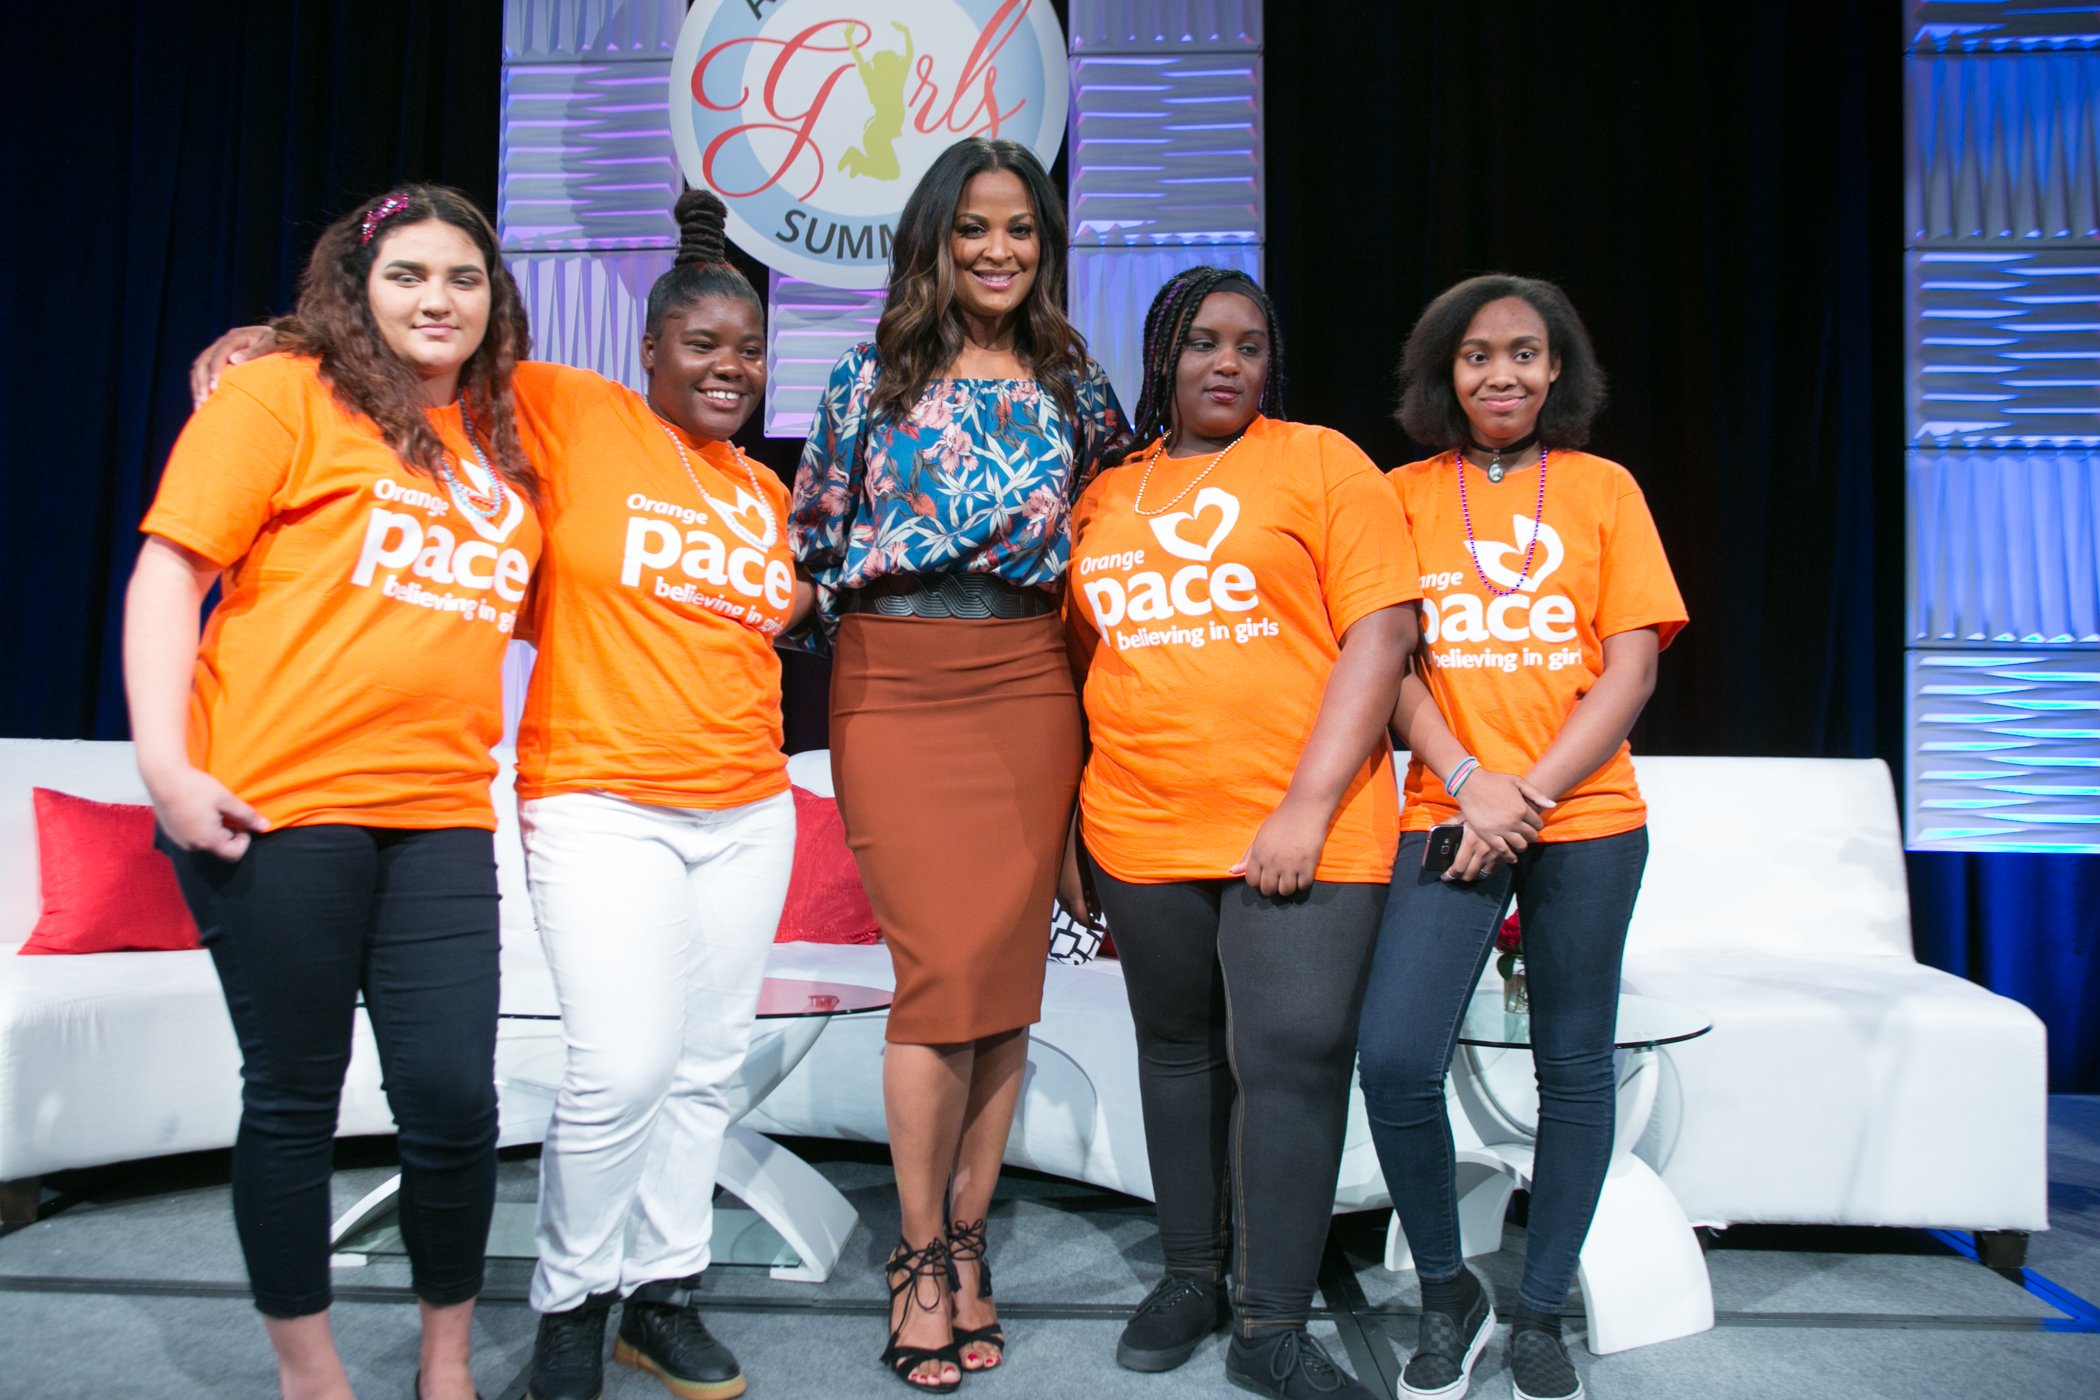 PACE All About Girls Summit with Laila Ali and Soledad O'Brien | Talia Felicia Events + Design | Fundraising Gala Planner, Meeting Planner 